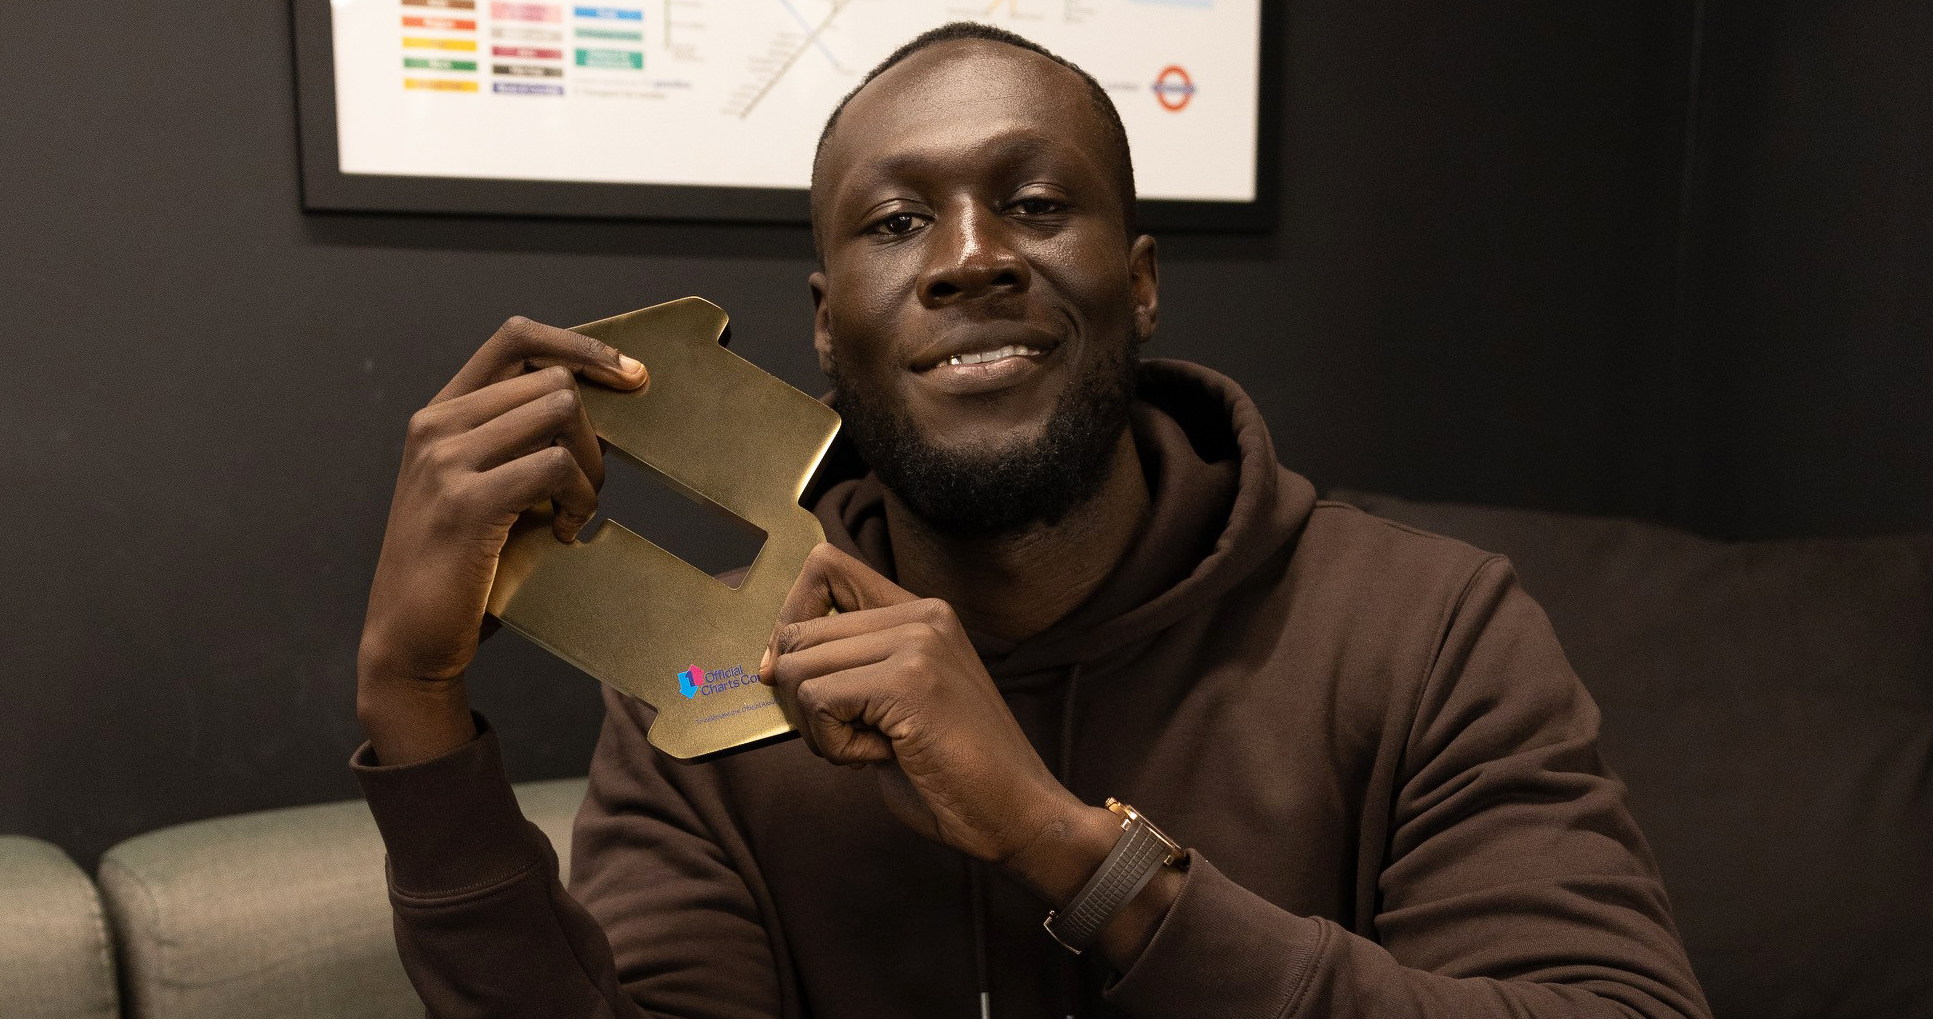 Stormzy beats Sir Cliff Richard to secure a hat-trick with third Number 1 album